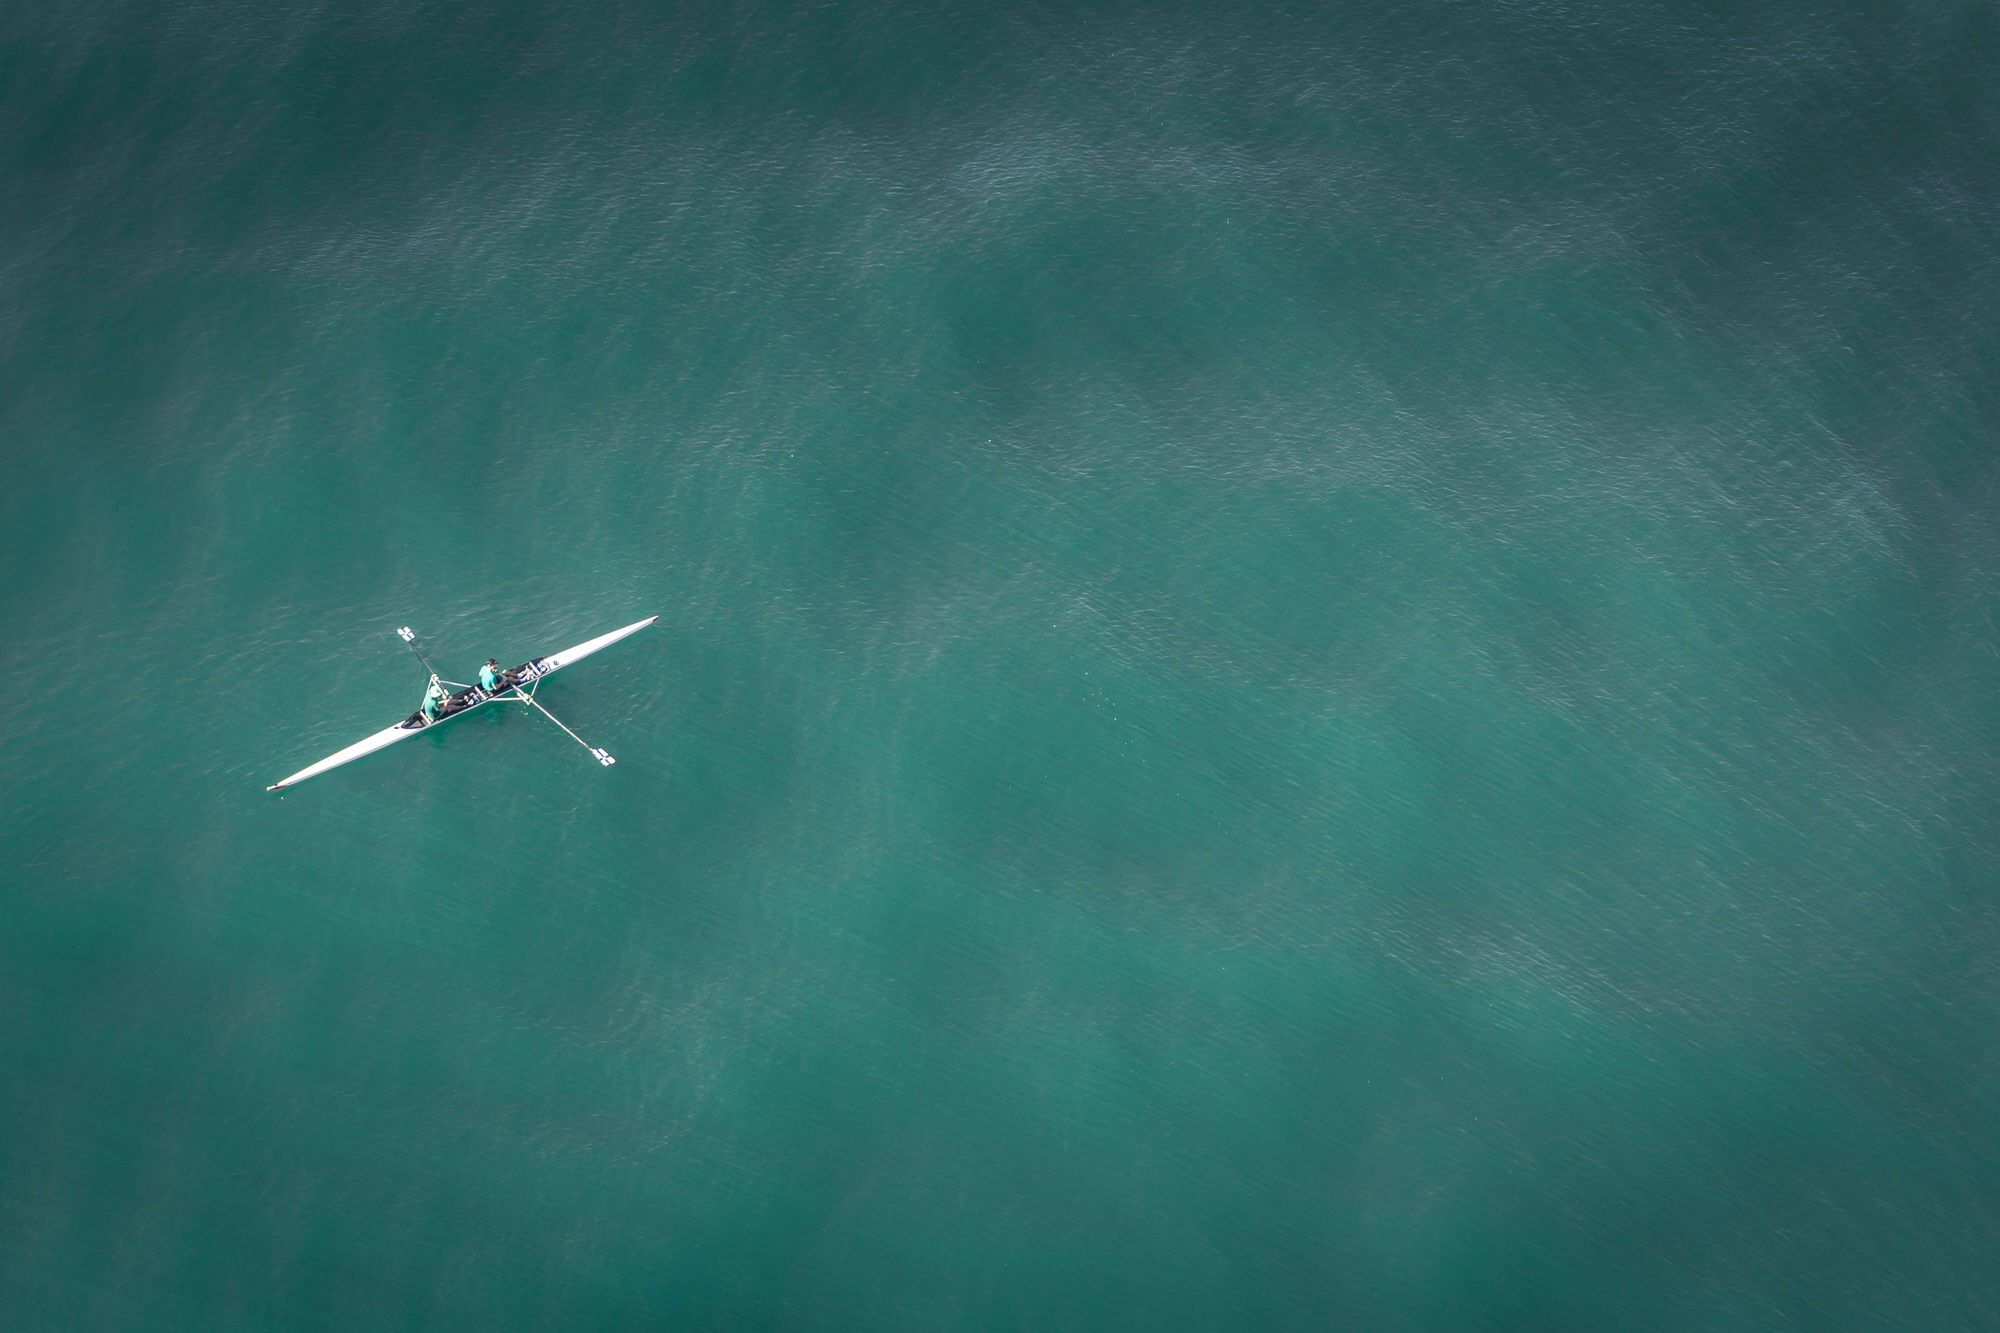 Internal stakeholders and senior leadership: Are we all rowing in the right direction across product, marketing, and sales?